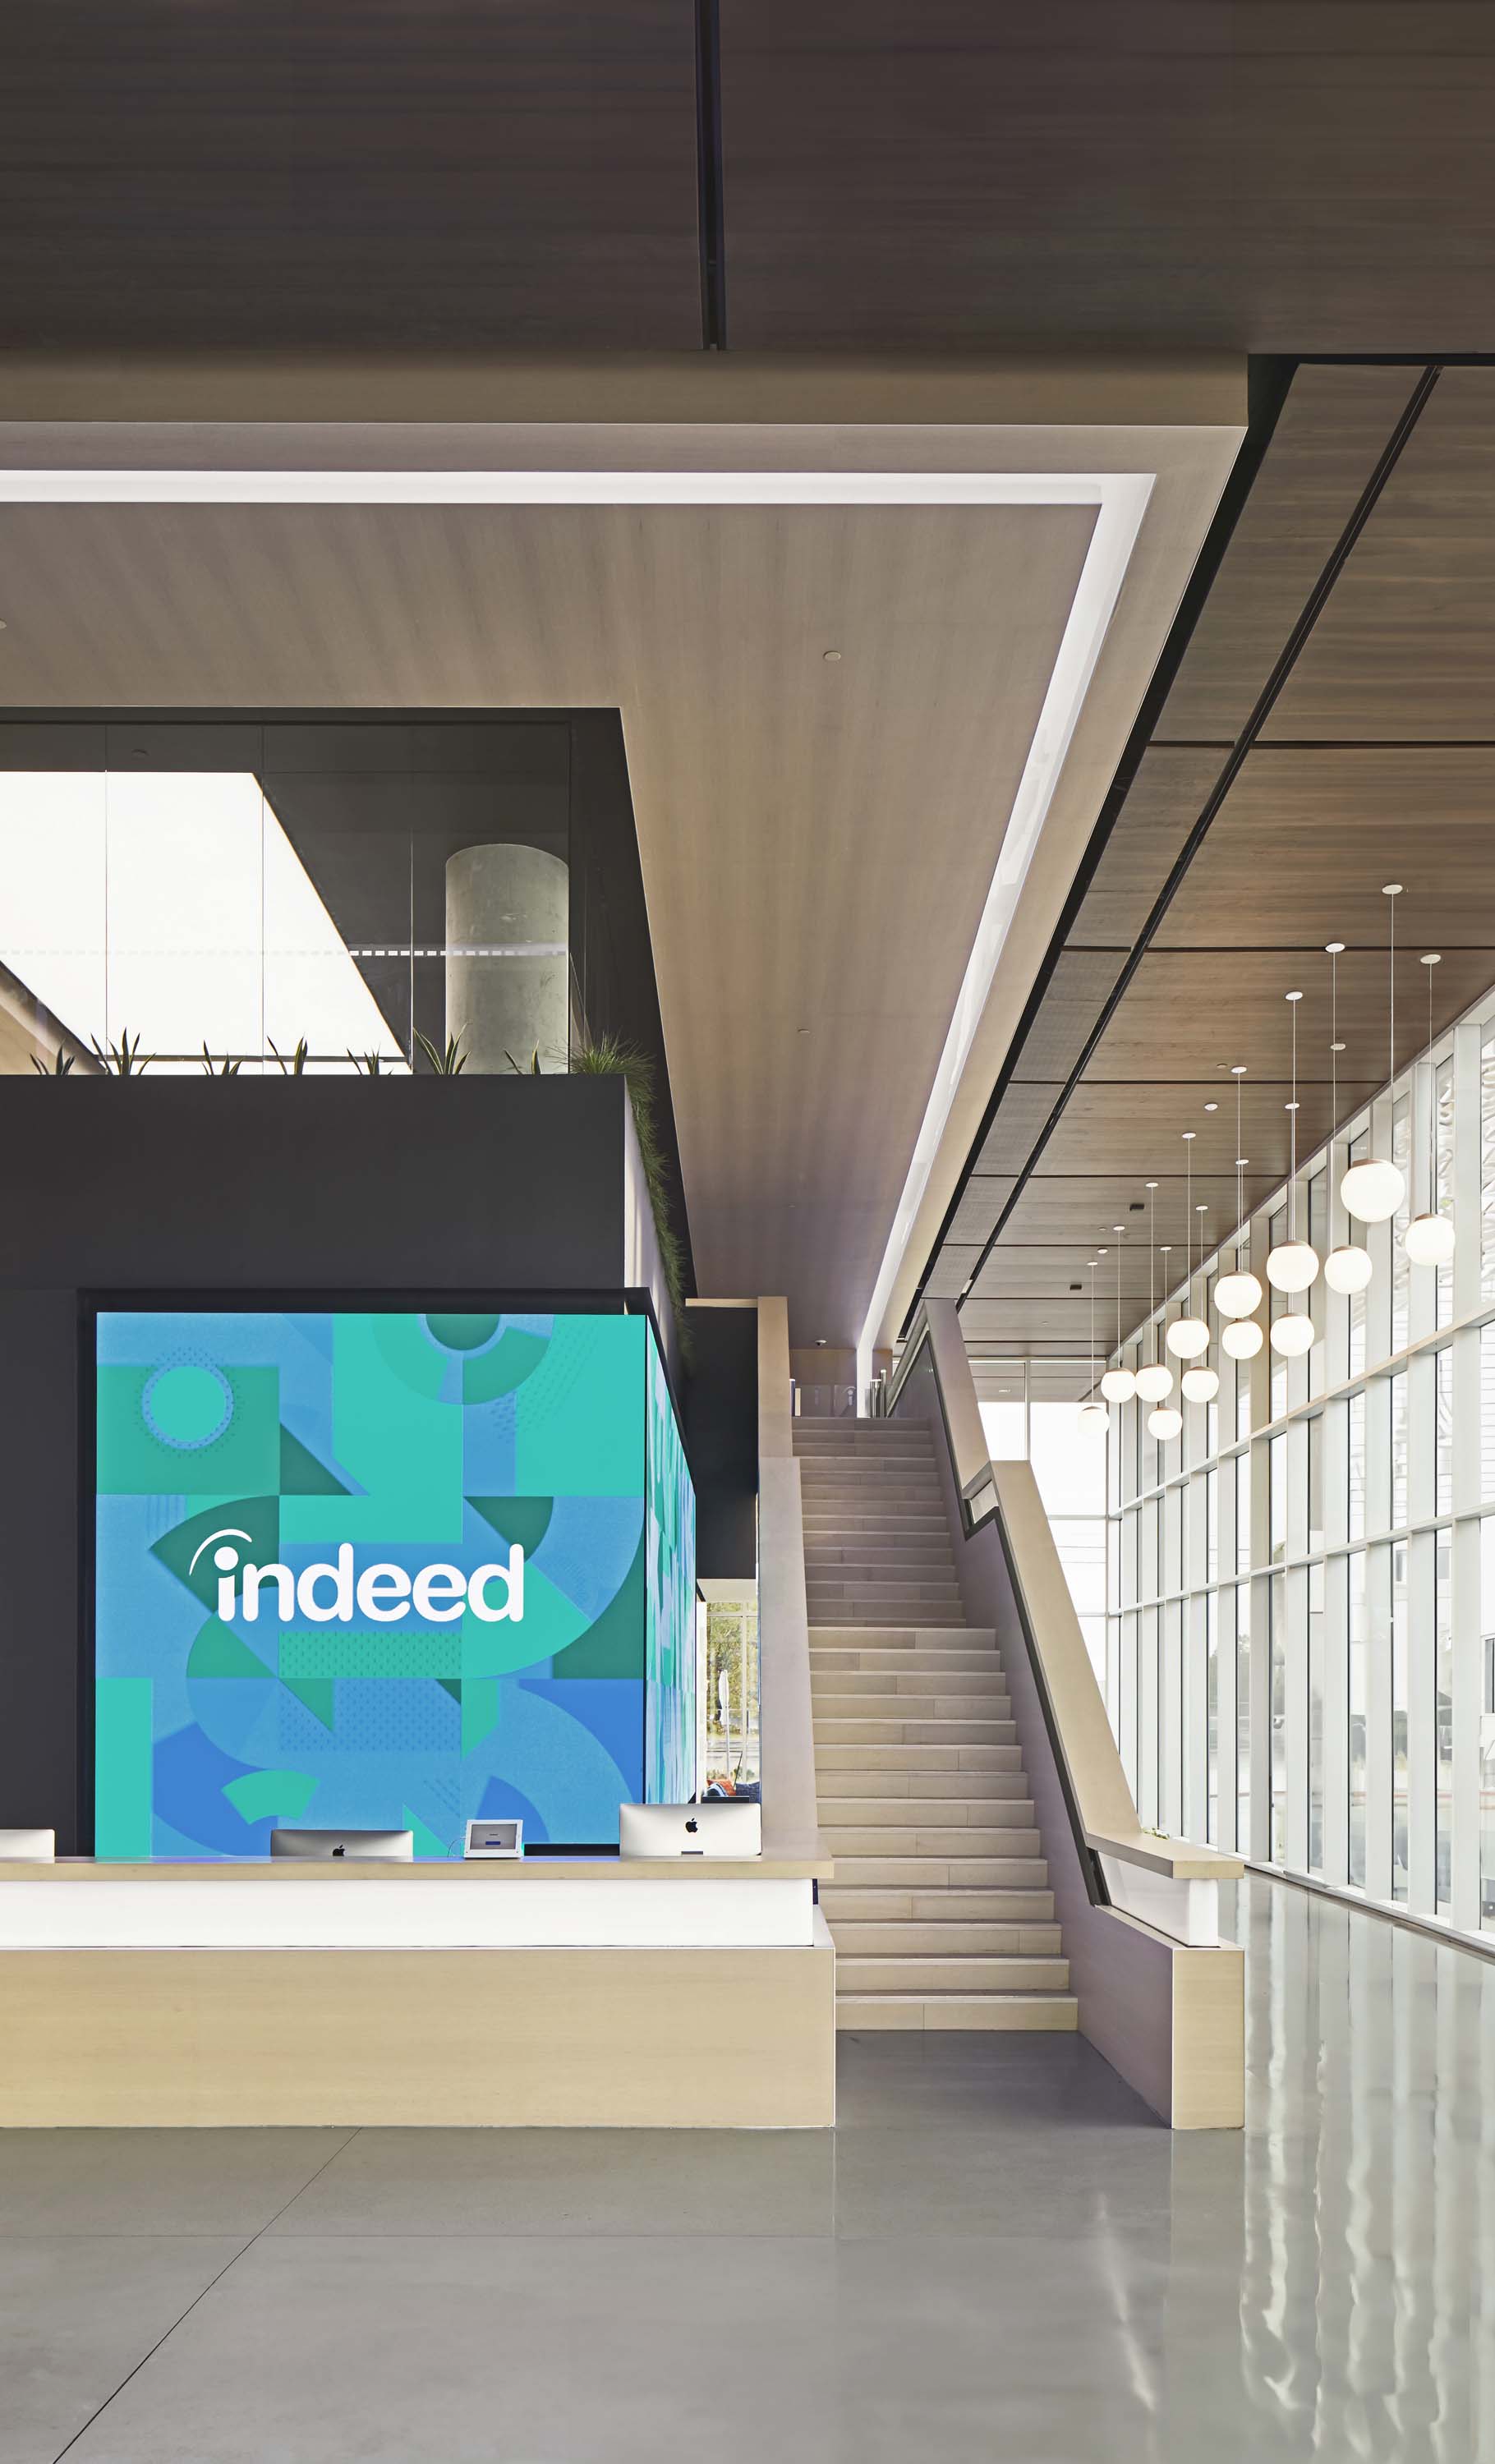 Indeed.com in Austin, Texas by Specht Novak Architects, shot by Andrea Calo, framed by desk and staircase showcasing cool toned materials and open floorplan.